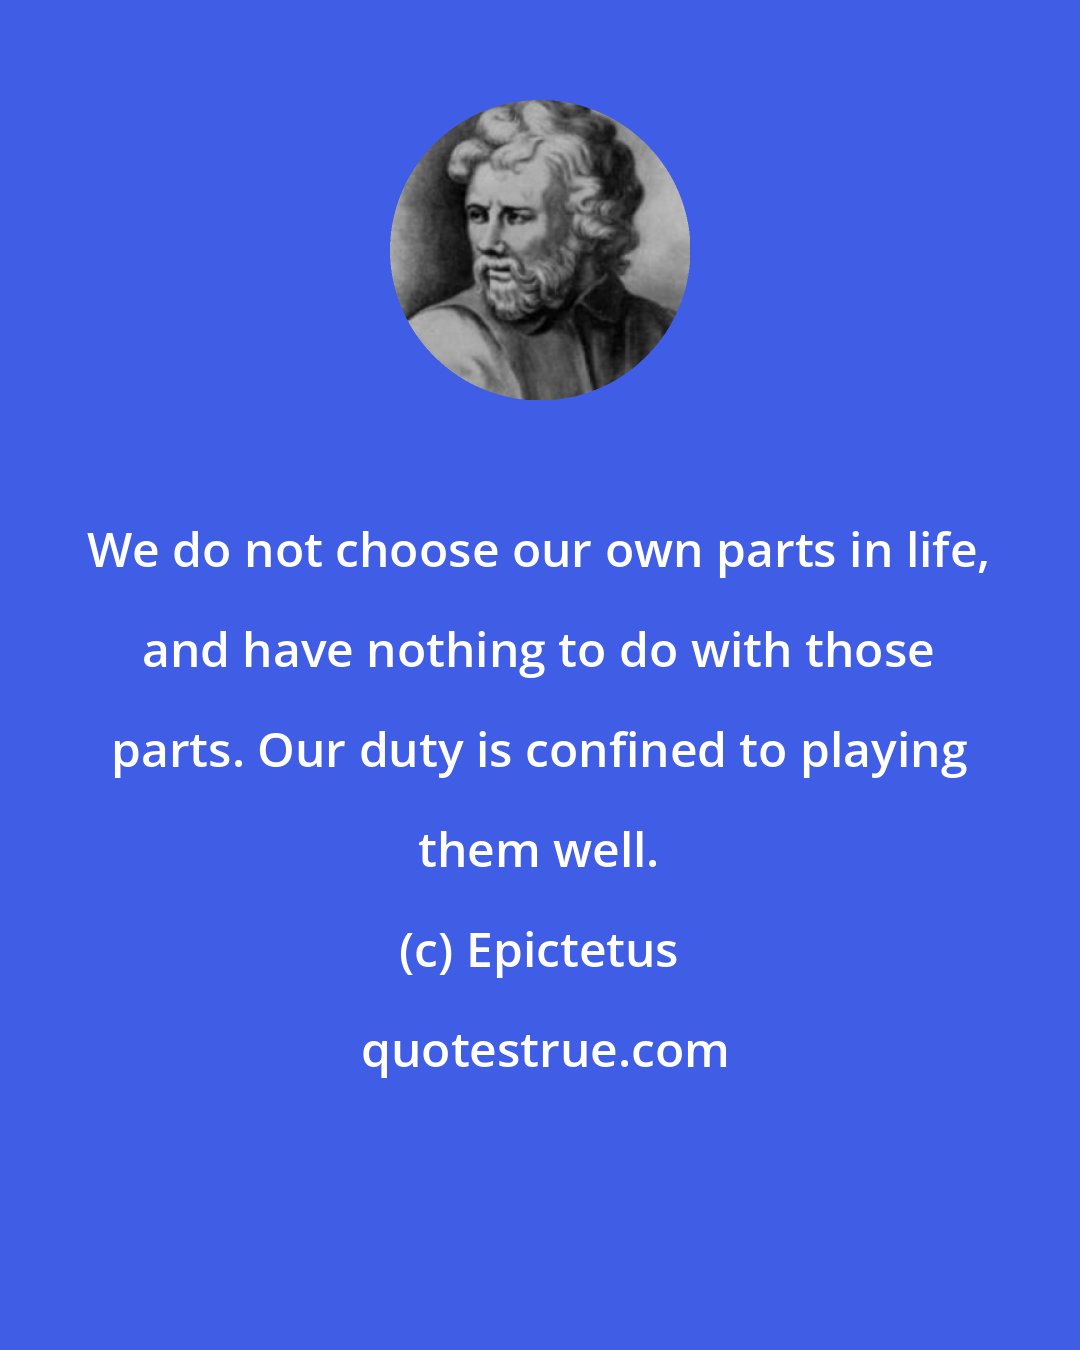 Epictetus: We do not choose our own parts in life, and have nothing to do with those parts. Our duty is confined to playing them well.